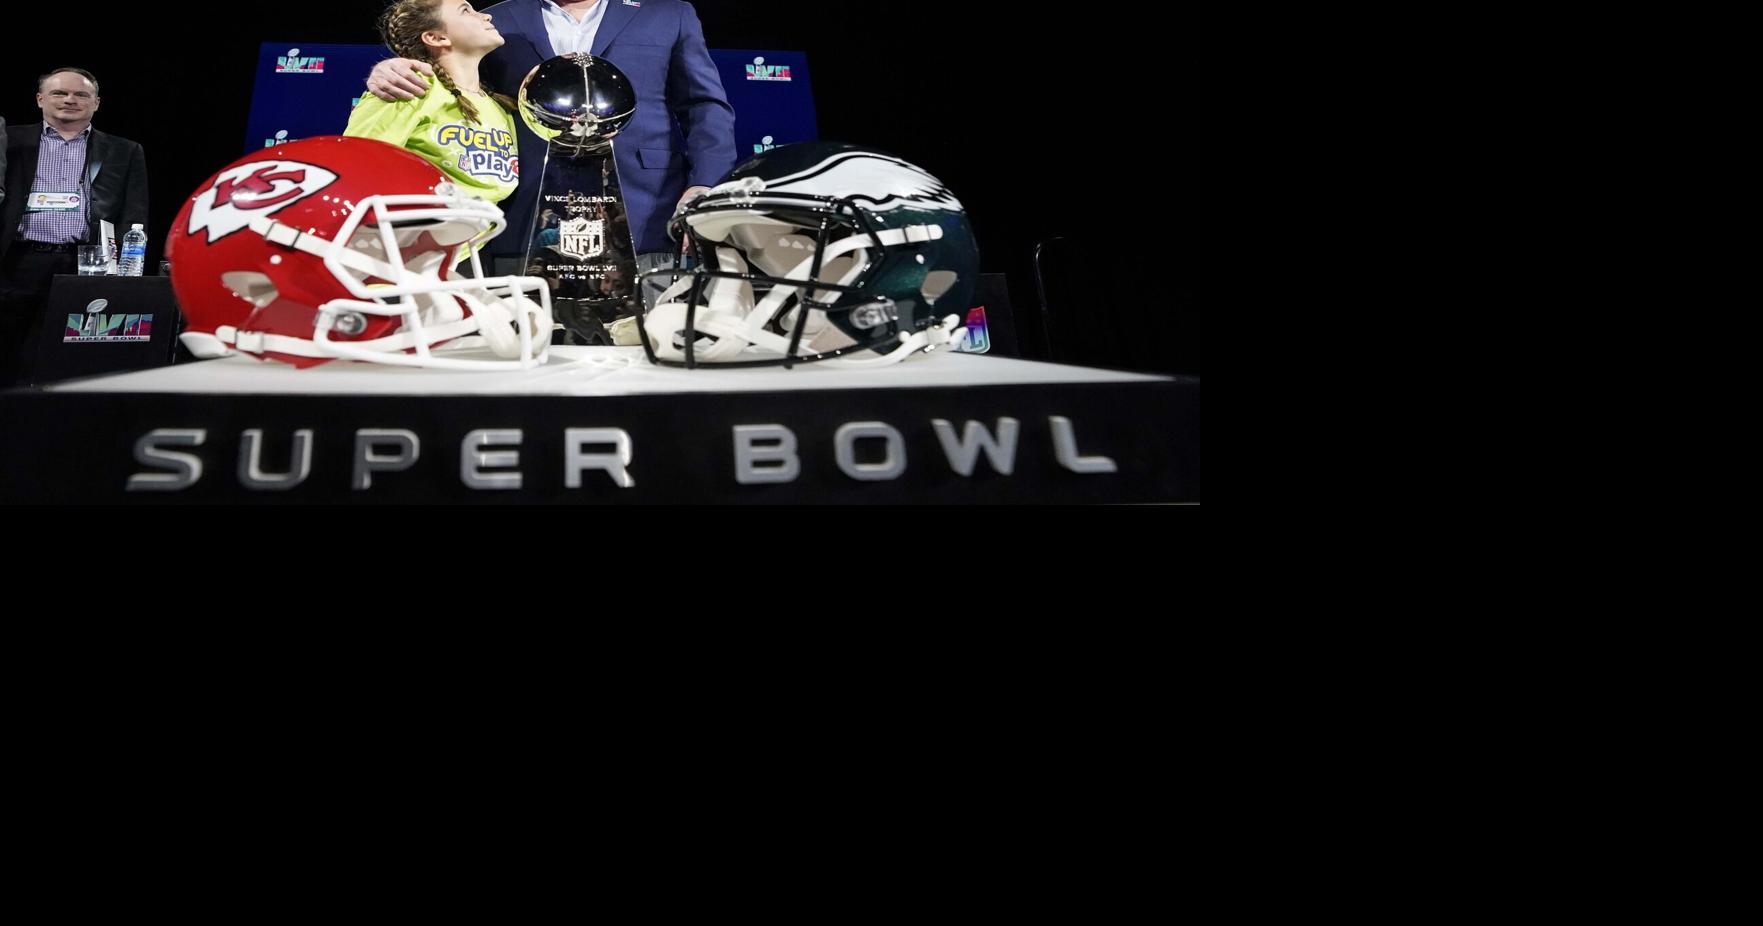 Super Bowl, Phoenix Open final round likely to be in Valley on same day